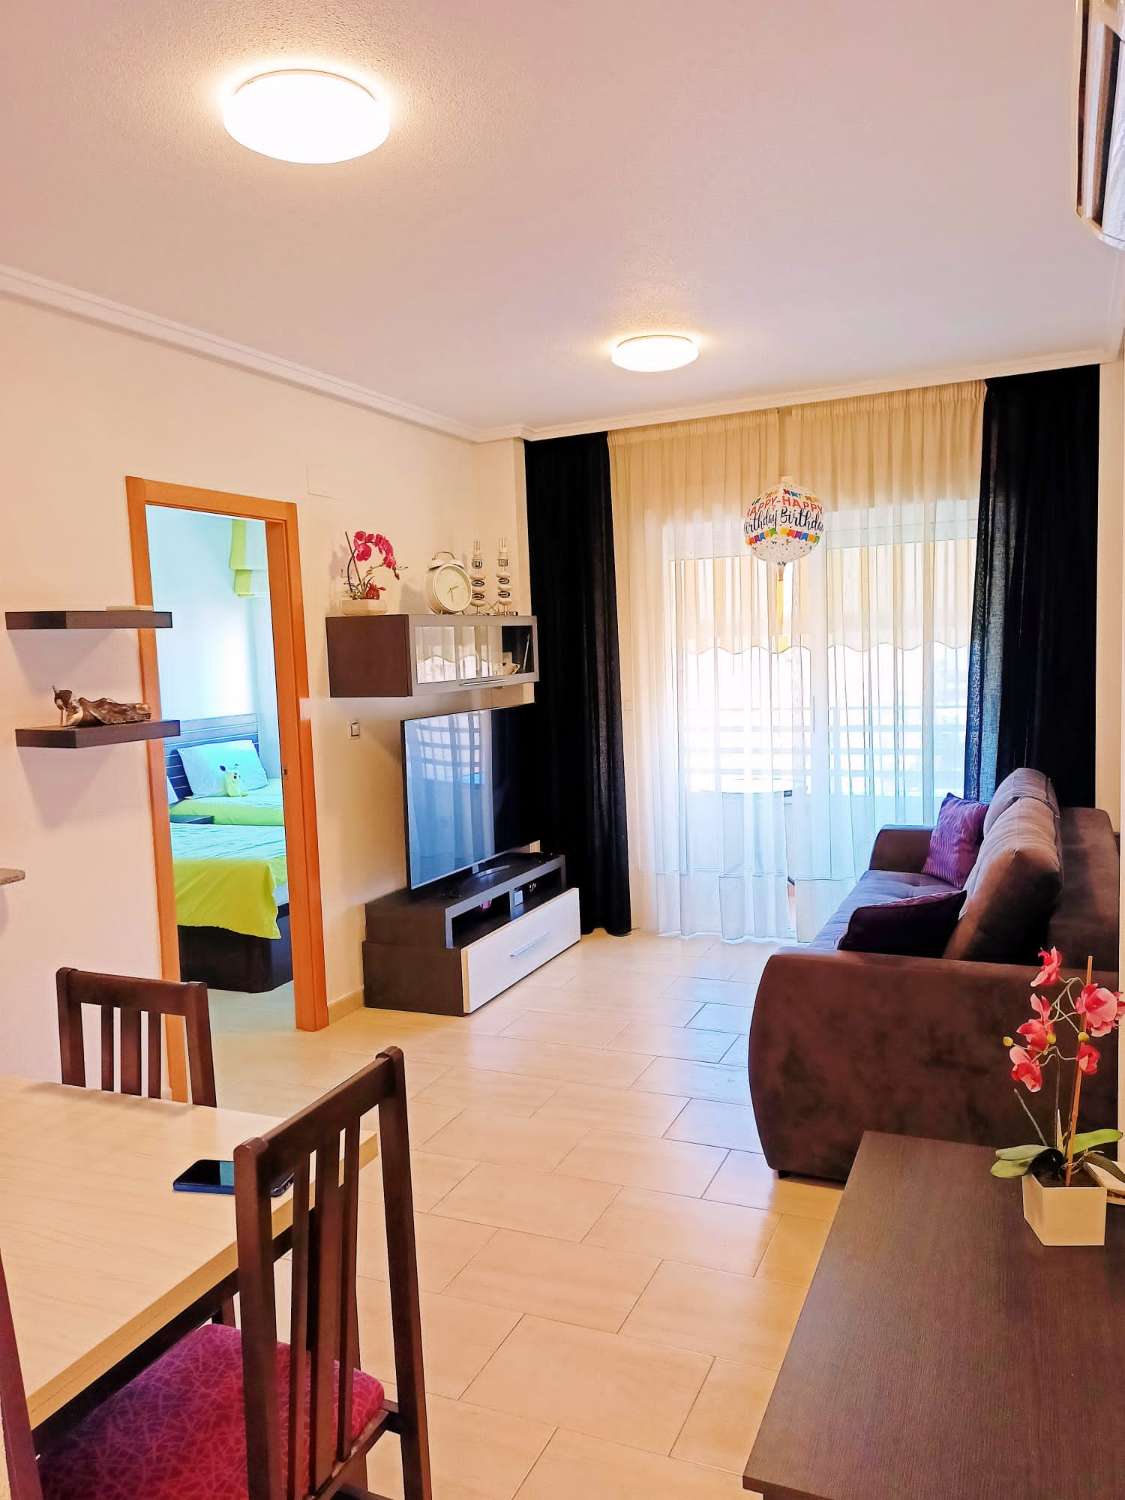 2 bedroom apartment to move into in Torrevieja (Costa Blanca South)